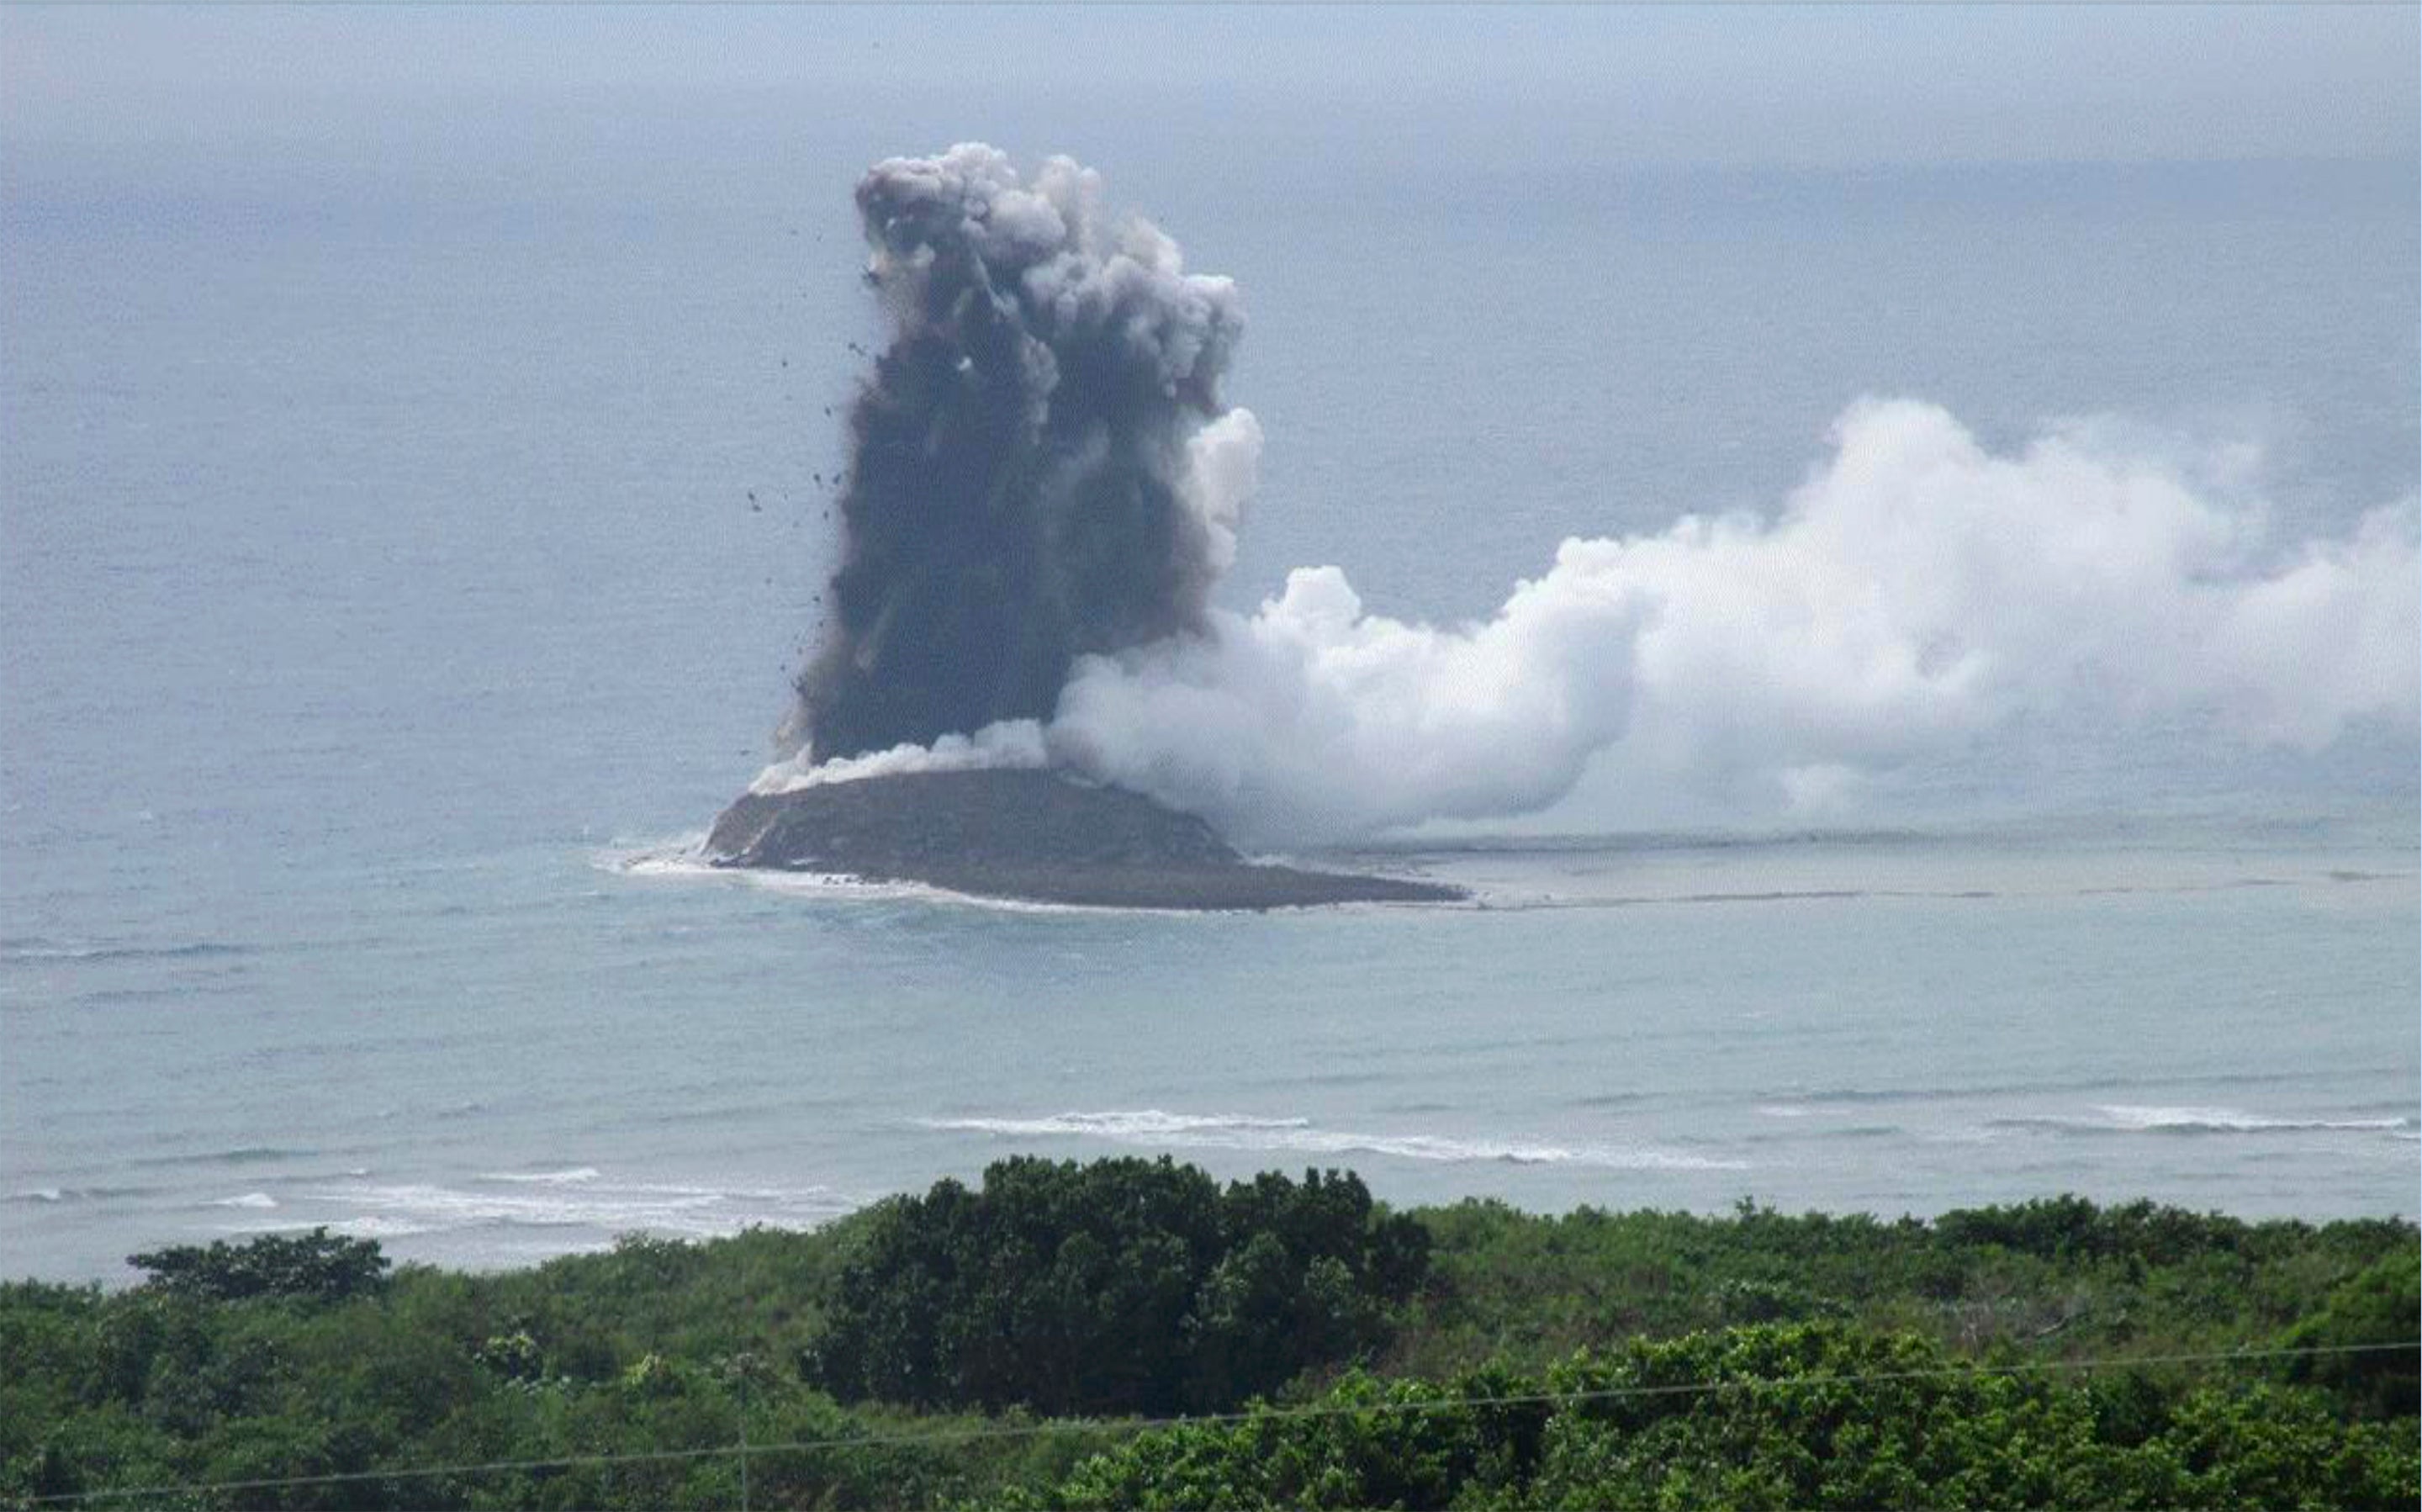 In this photo provided by the Japan Maritime Self-Defense Force, steam billows from the waters off Iwoto island, Ogasawara town in the Pacific Ocean